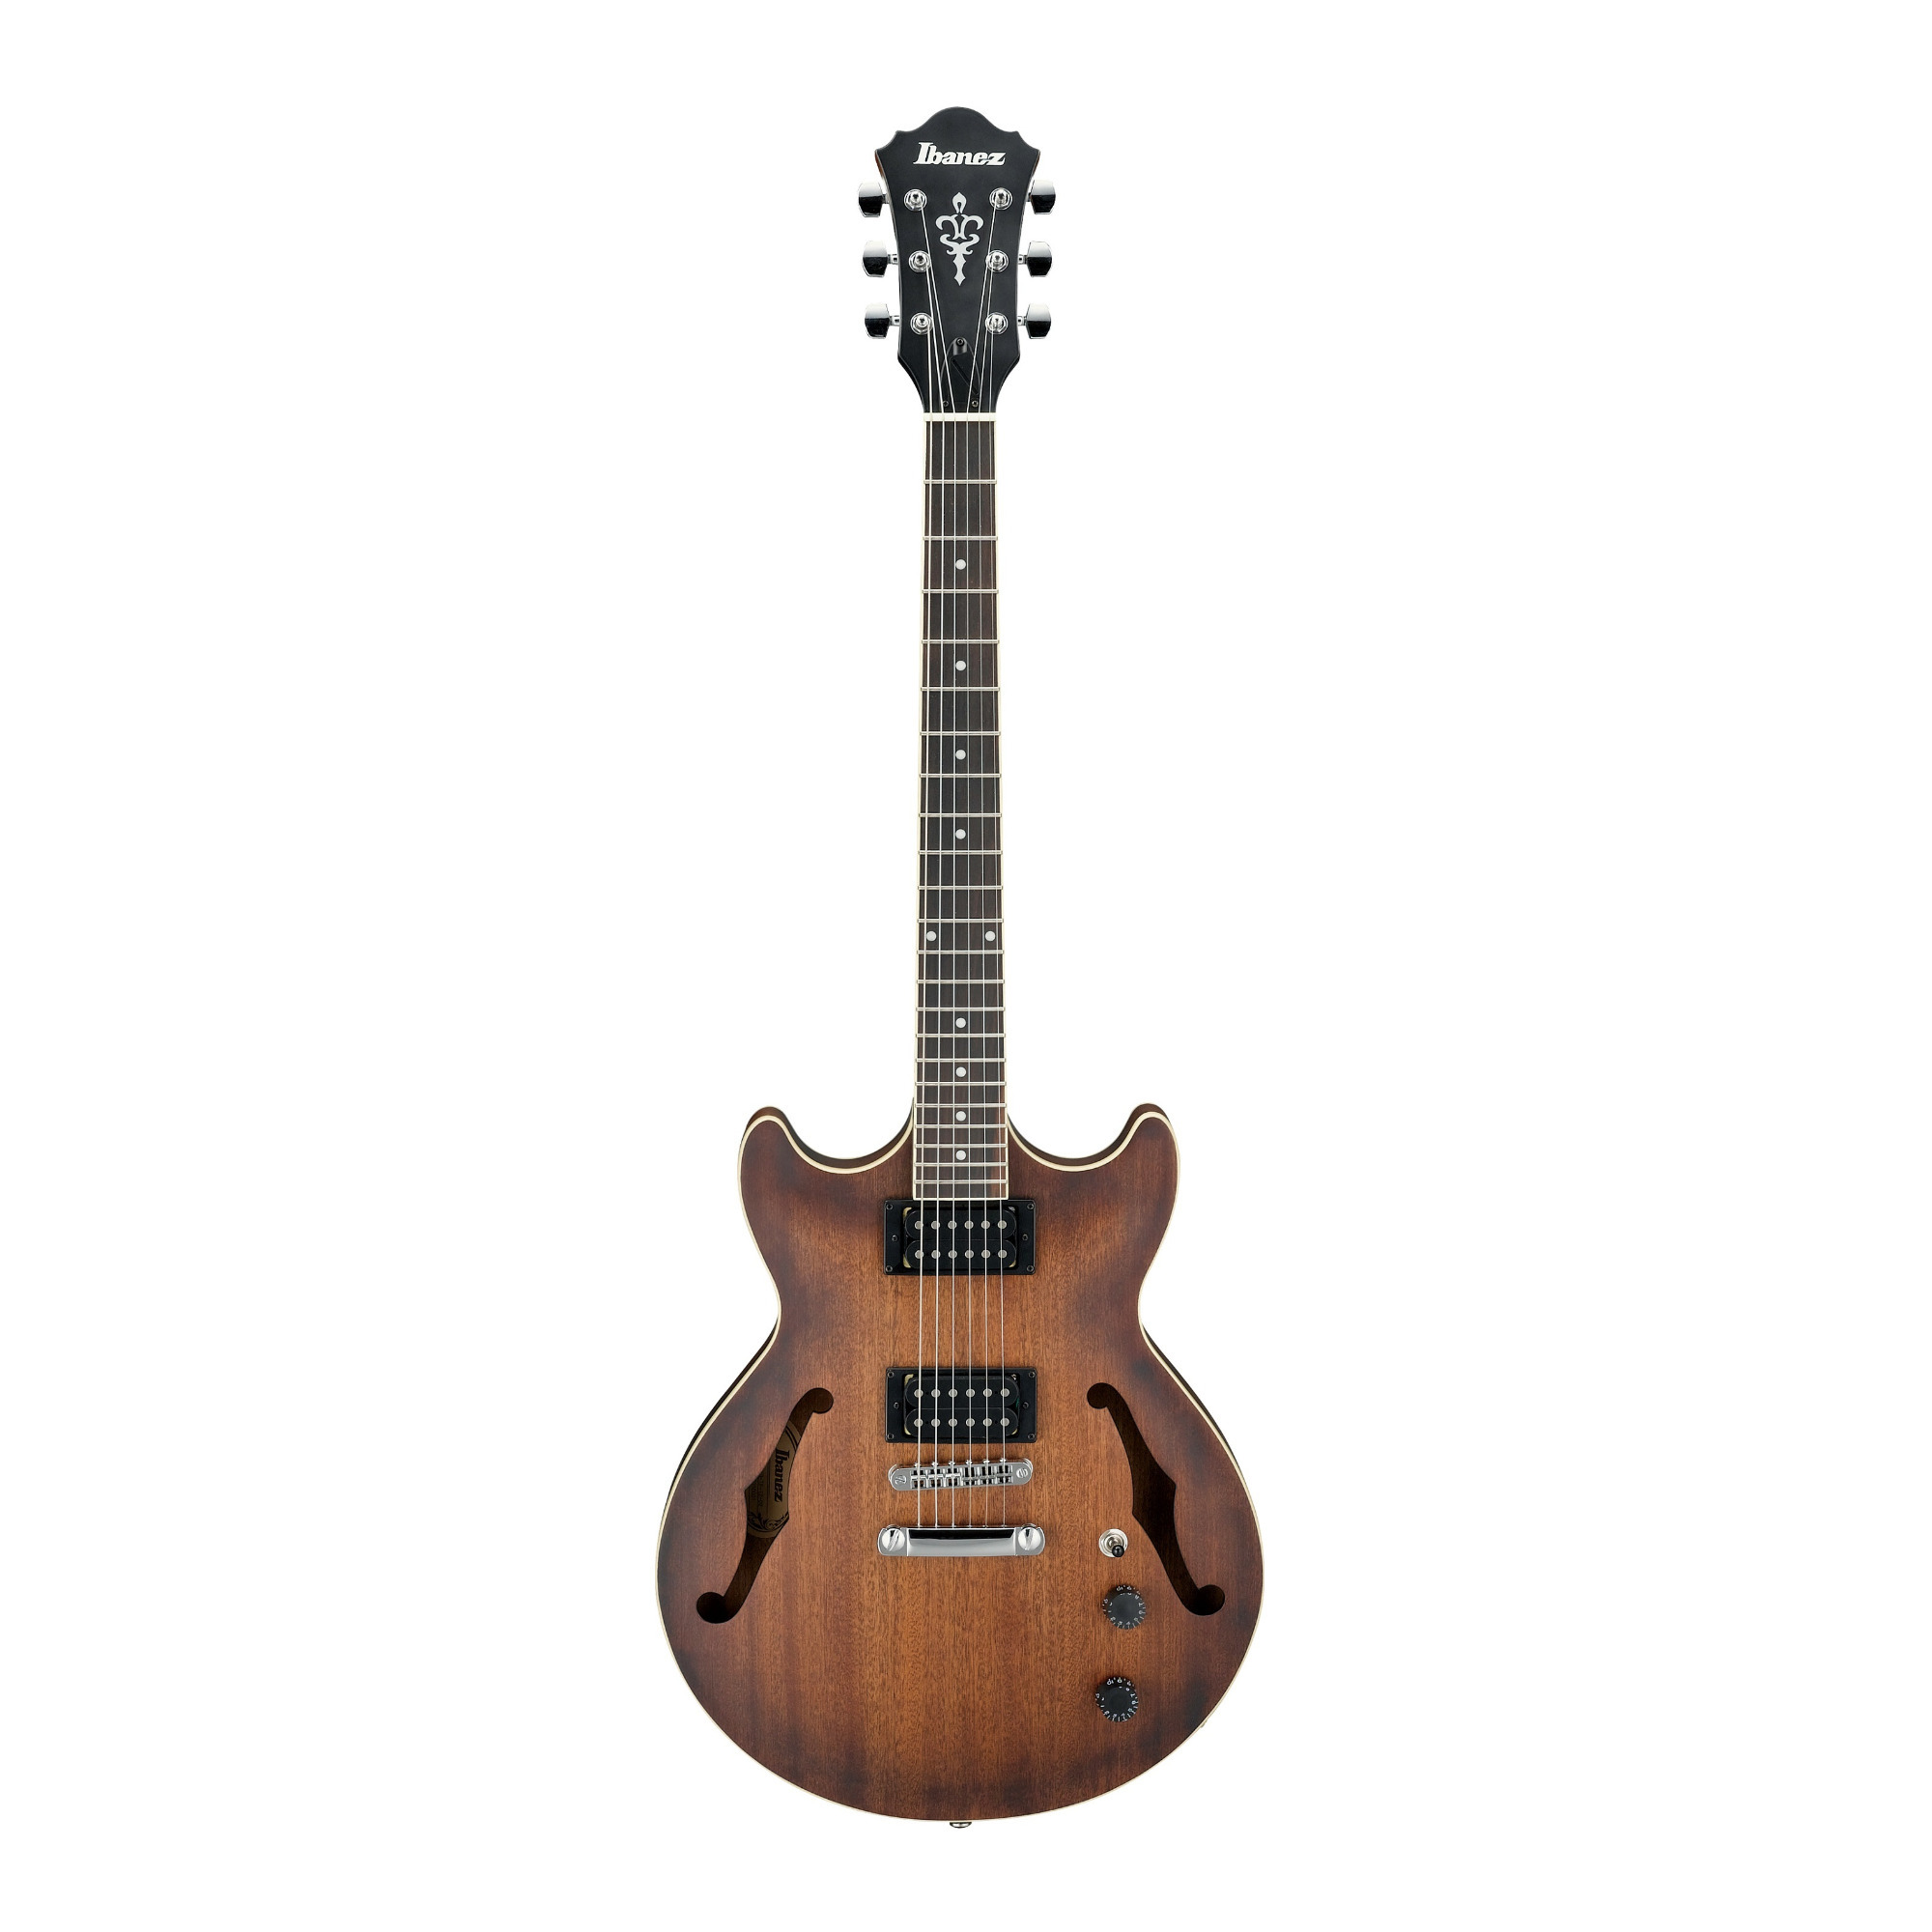 Ibanez AM53 6-String Hollow-Body Electric Guitar (Right-Hand, Tobacco Flat) -  AM53TF